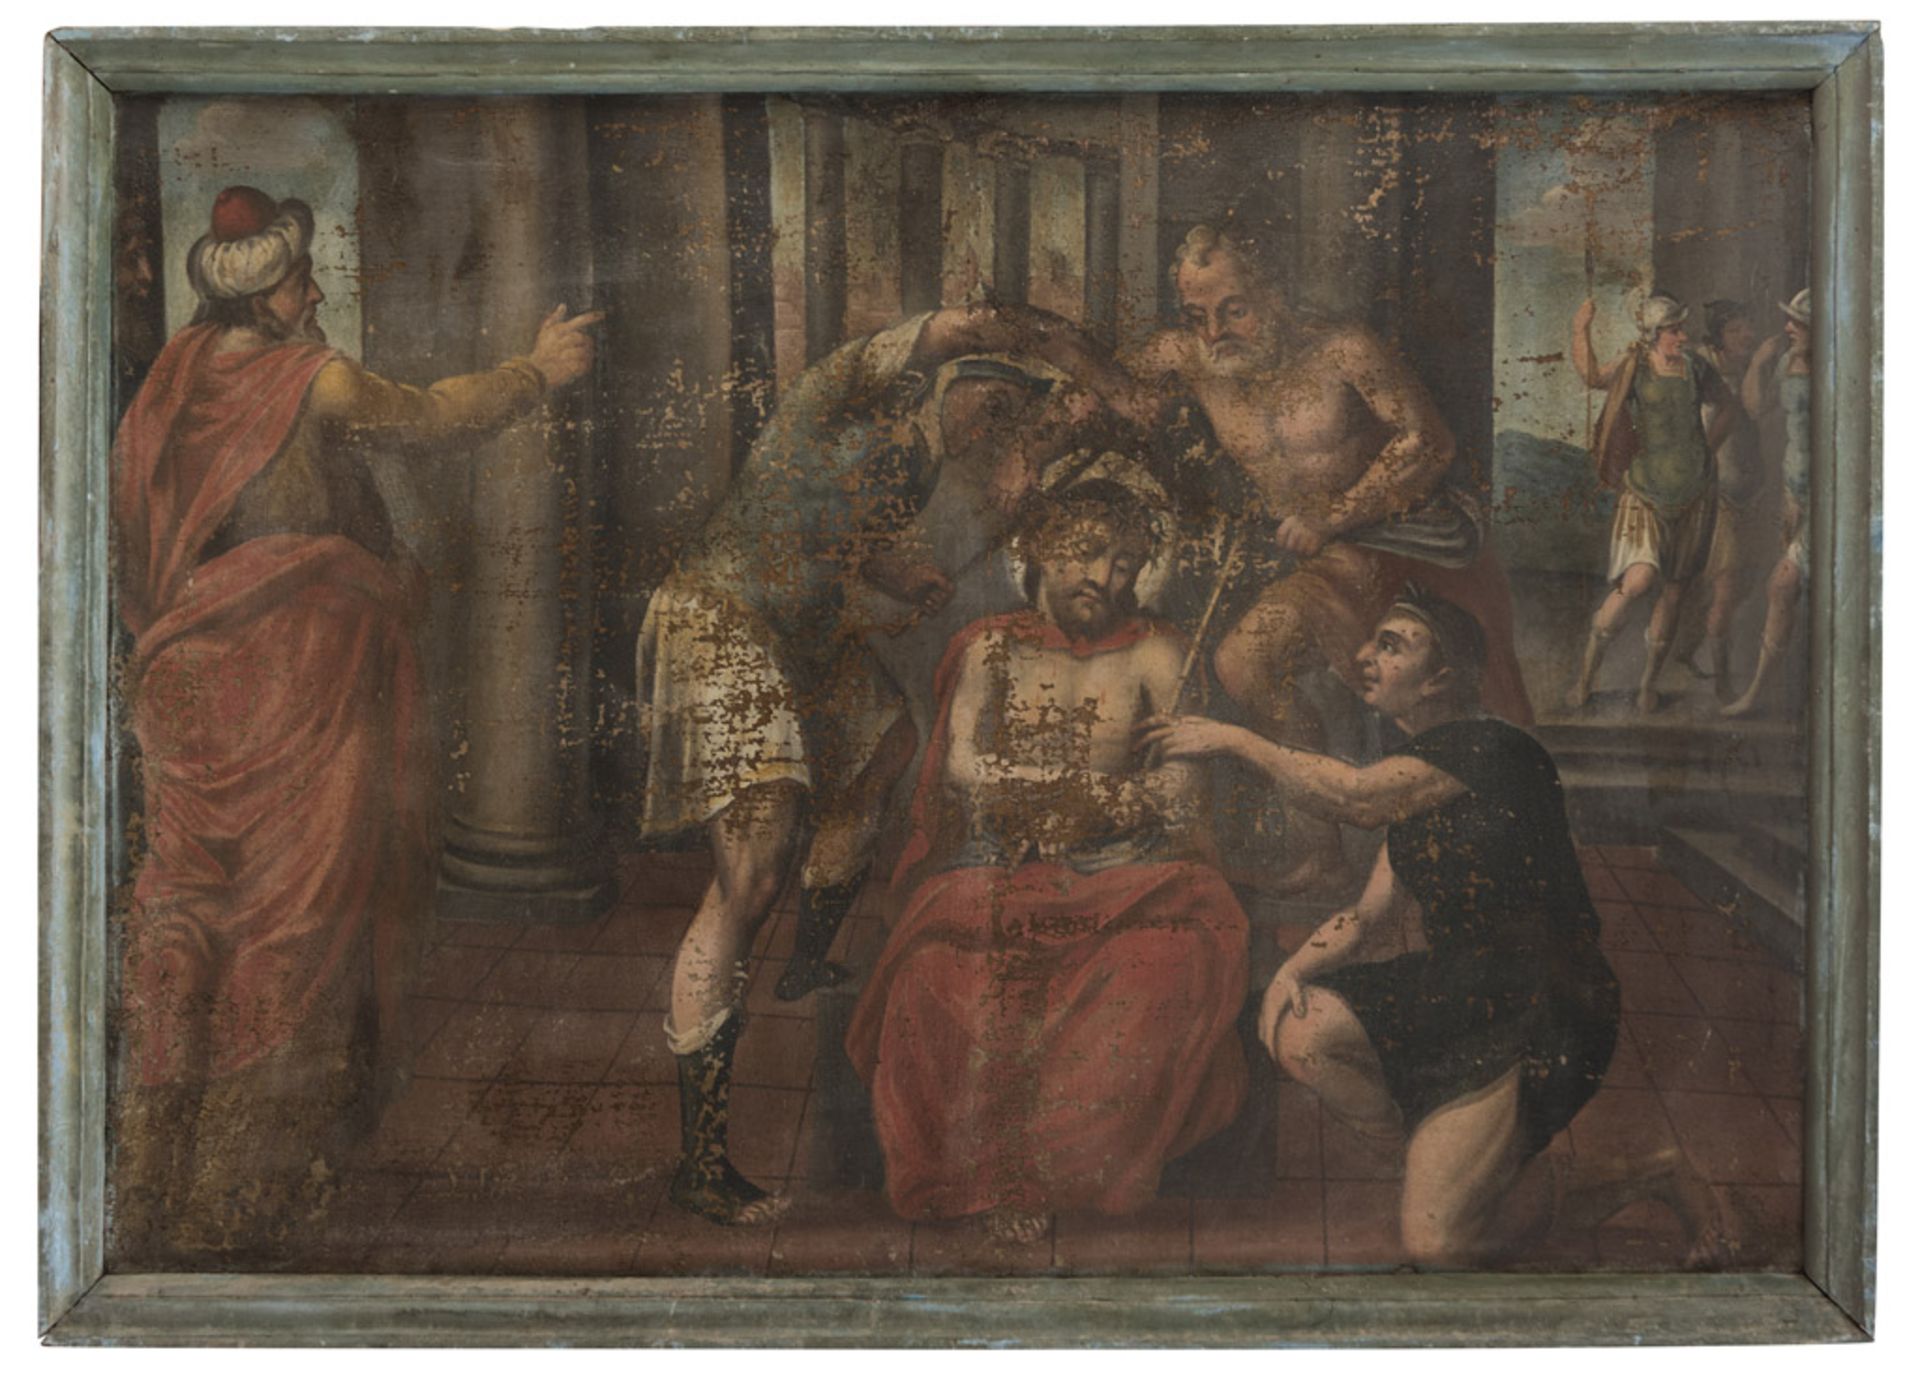 LATE MANNERIST TUSCAN ROMAN PAINTER CHRIST WITH CROWN OF THORNS FLAGELLATION CHRIST AND VERONICA - Image 2 of 3